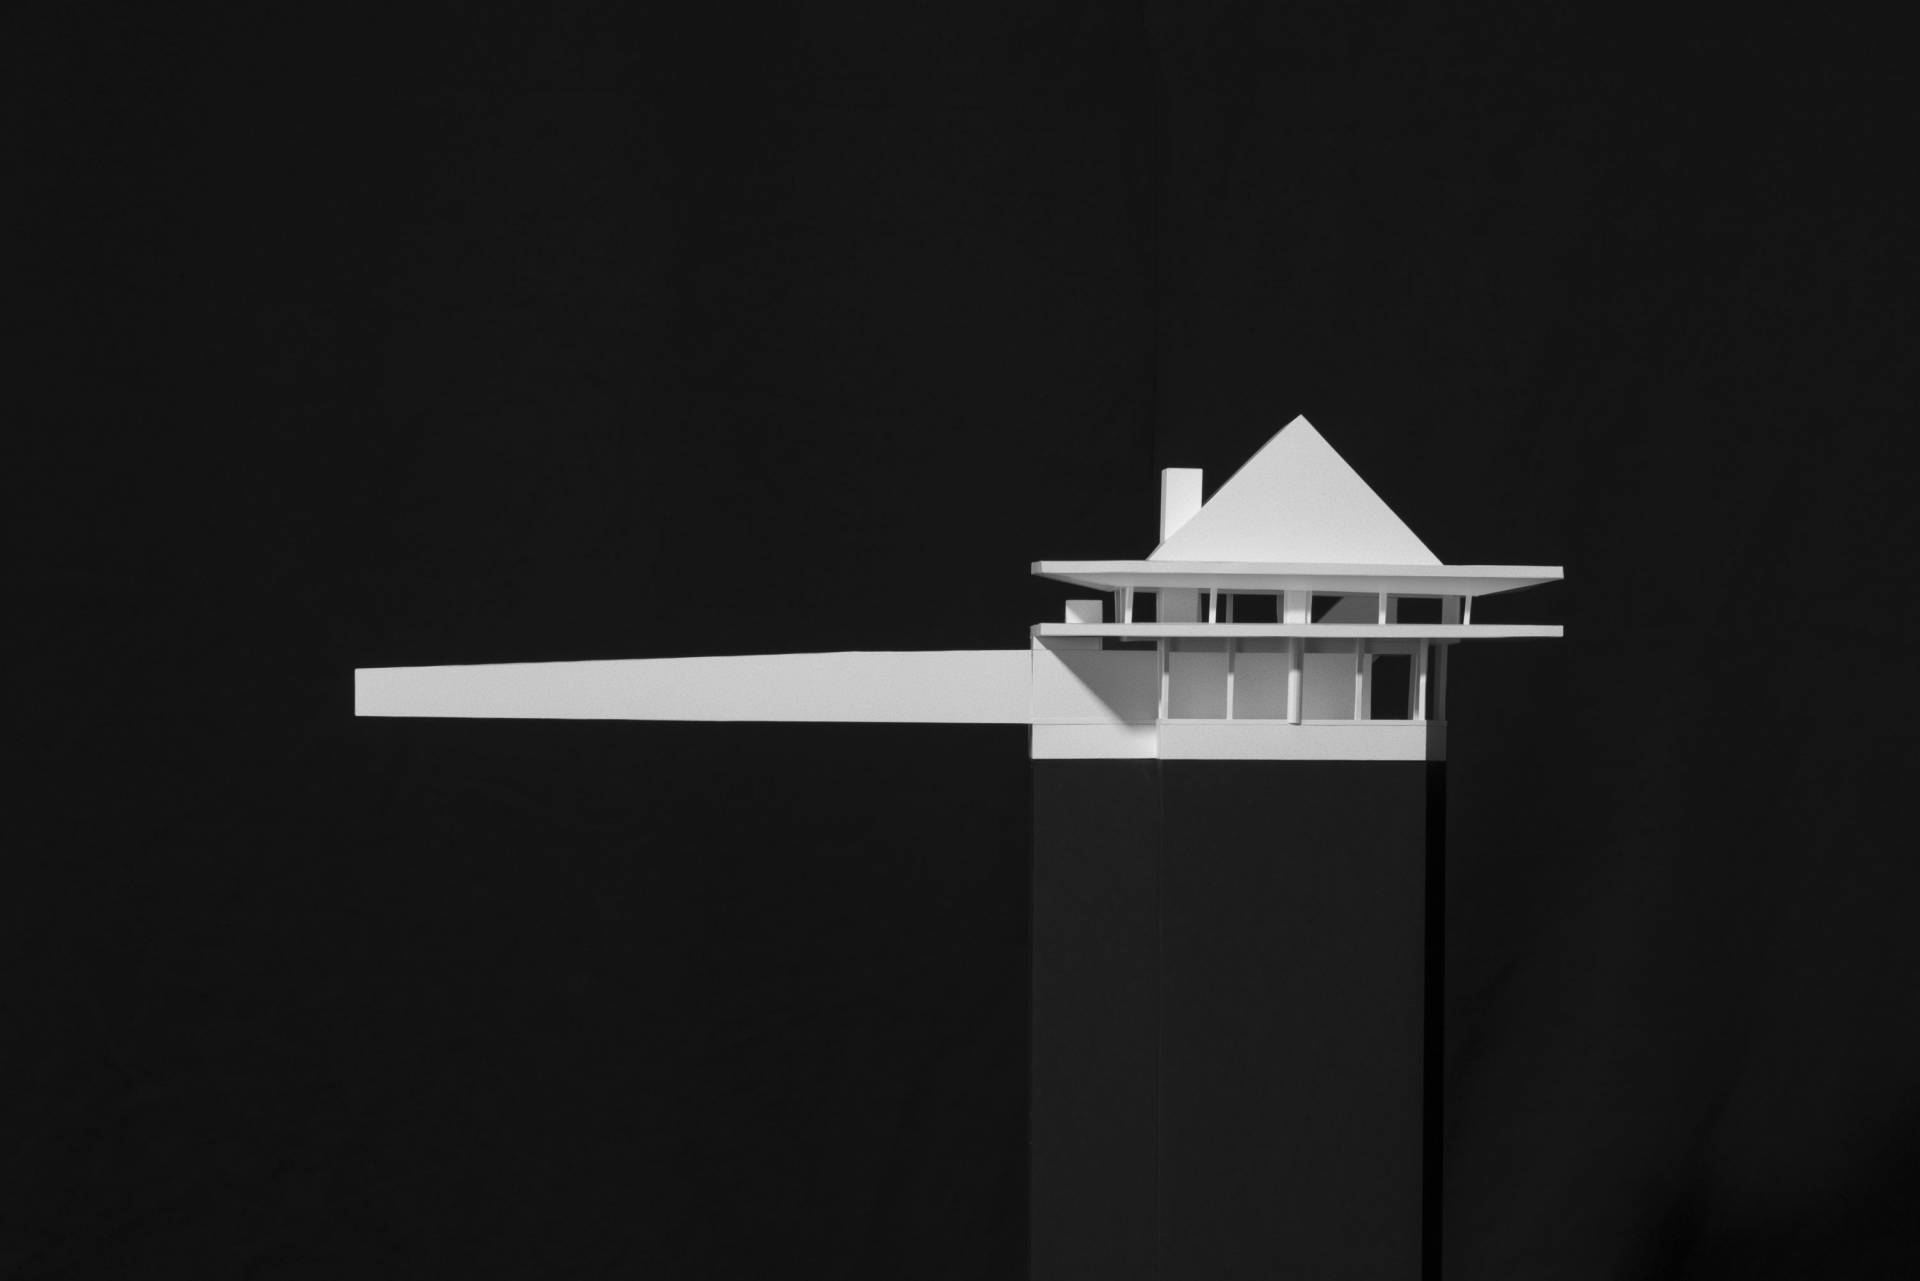 House number 3 in the architecture exhibit